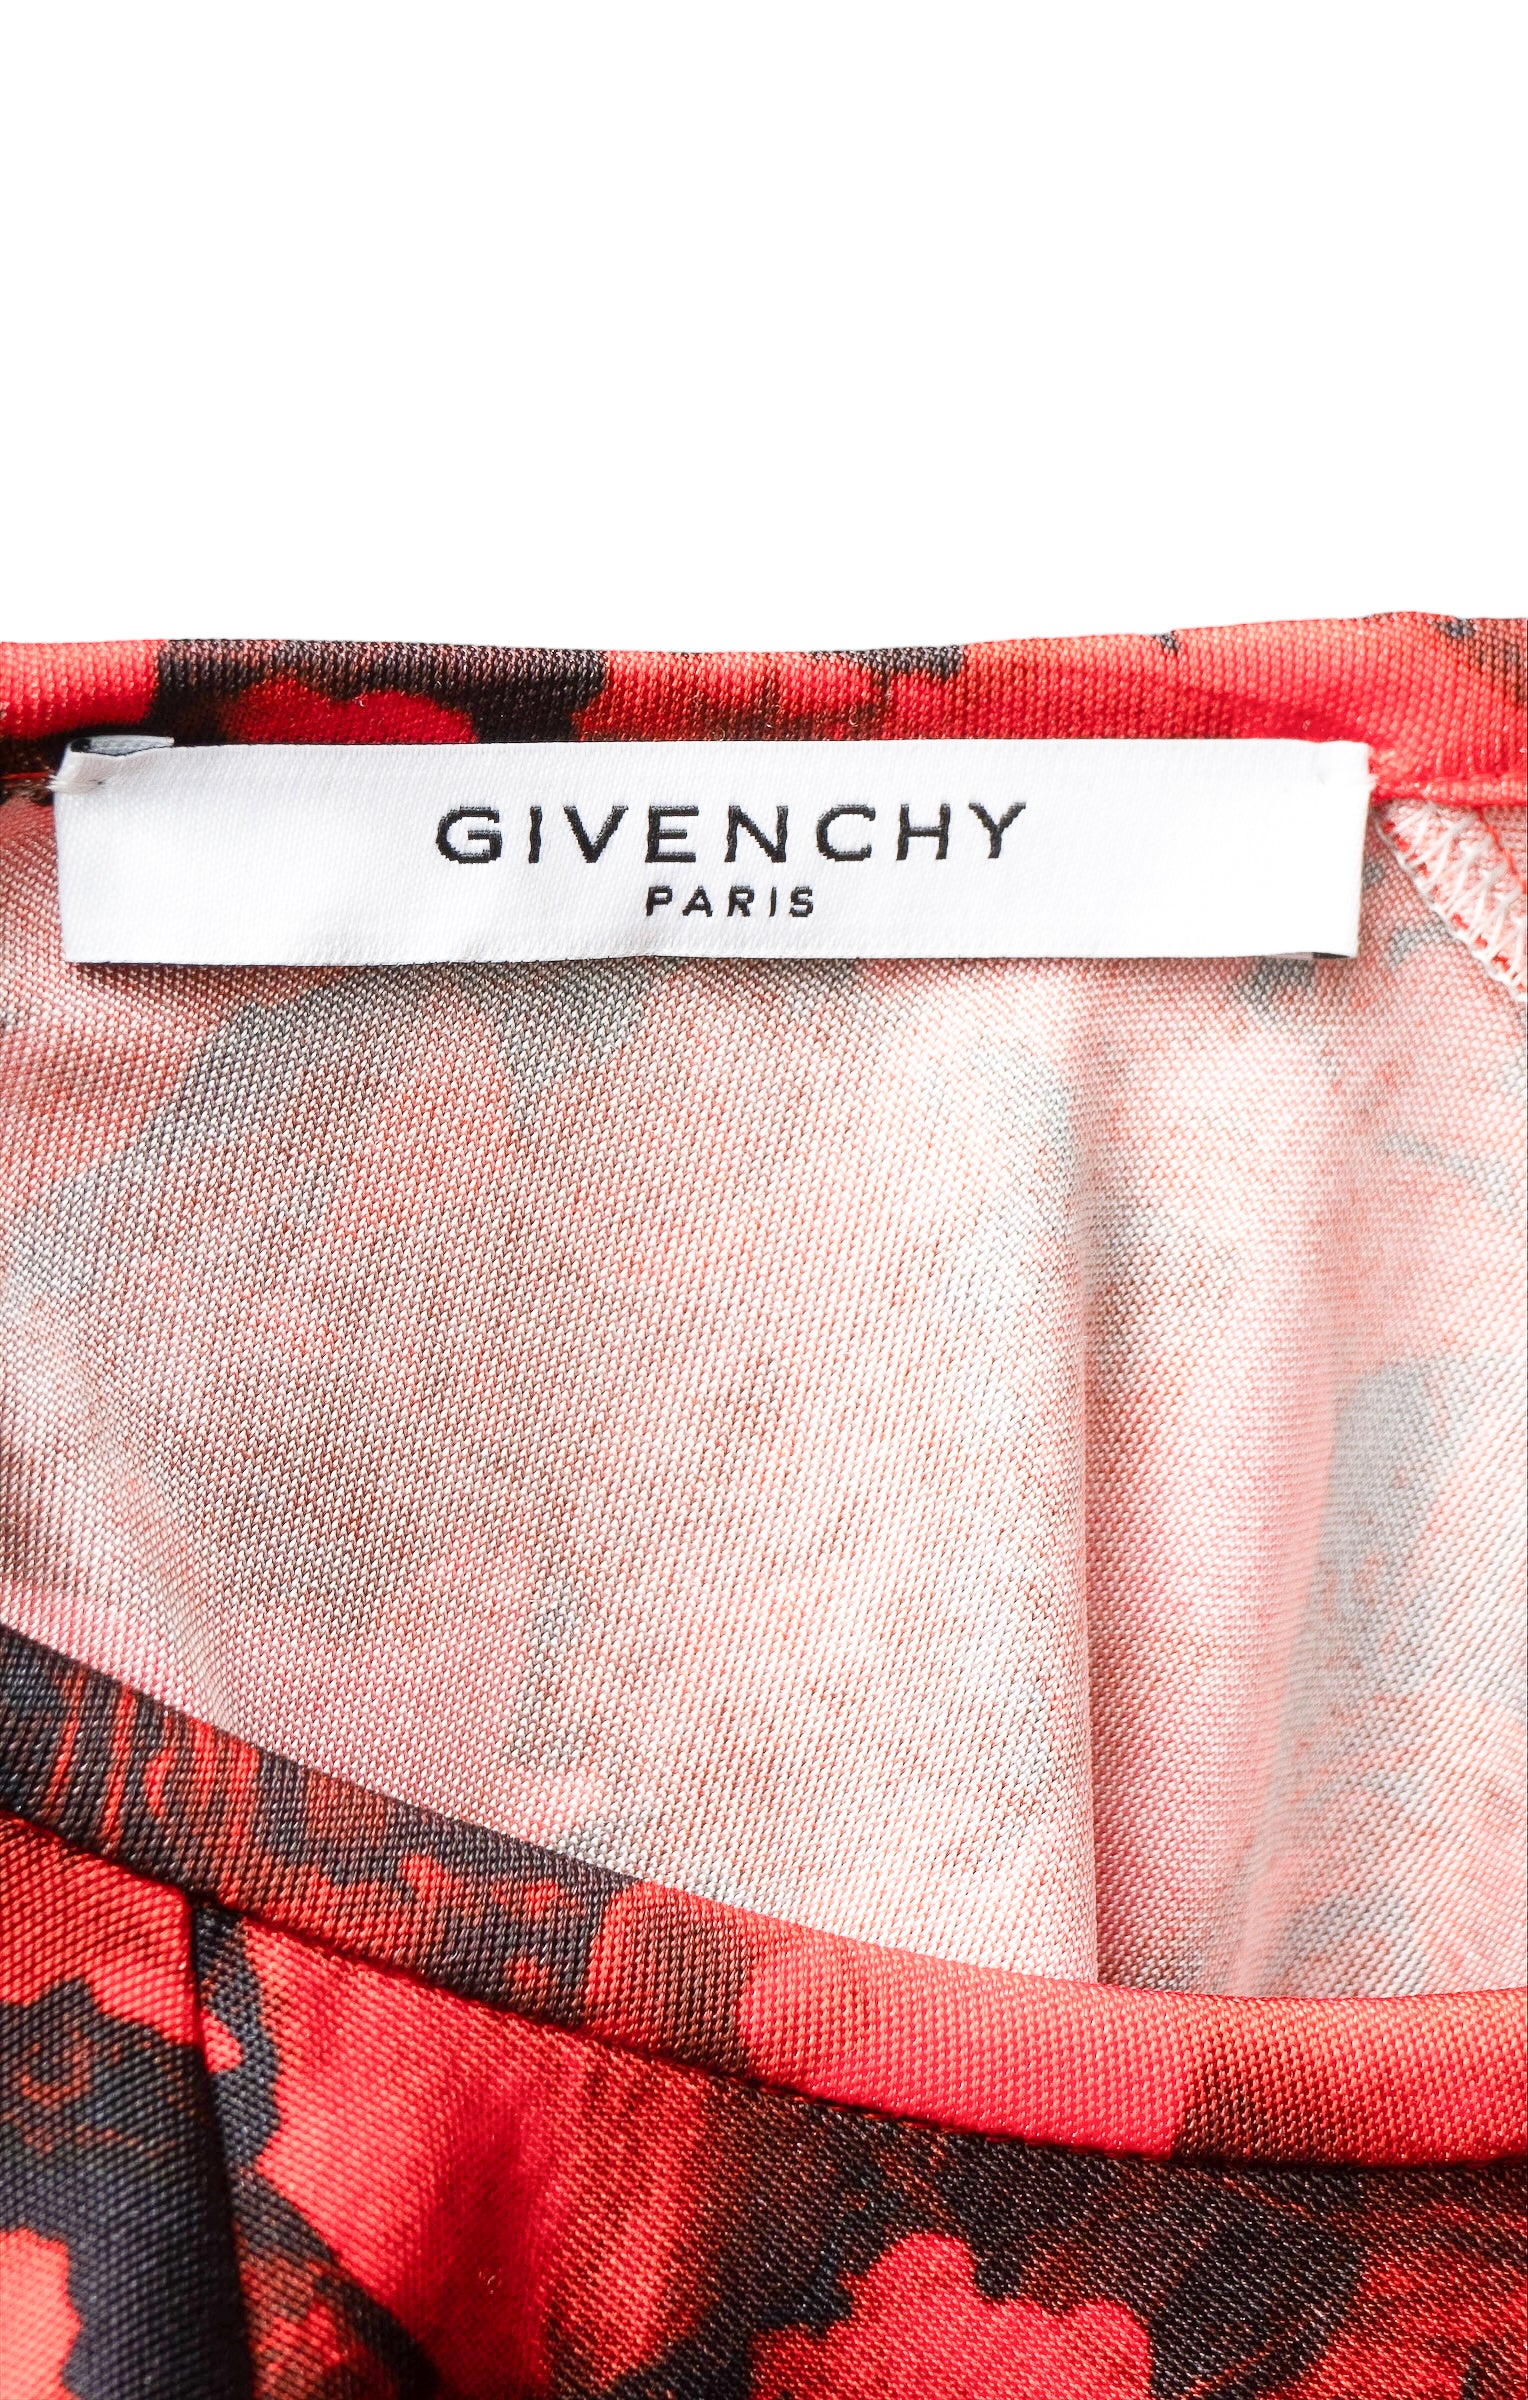 GIVENCHY (RARE) Dress  Size: FR 38 / Comparable to US 4-6